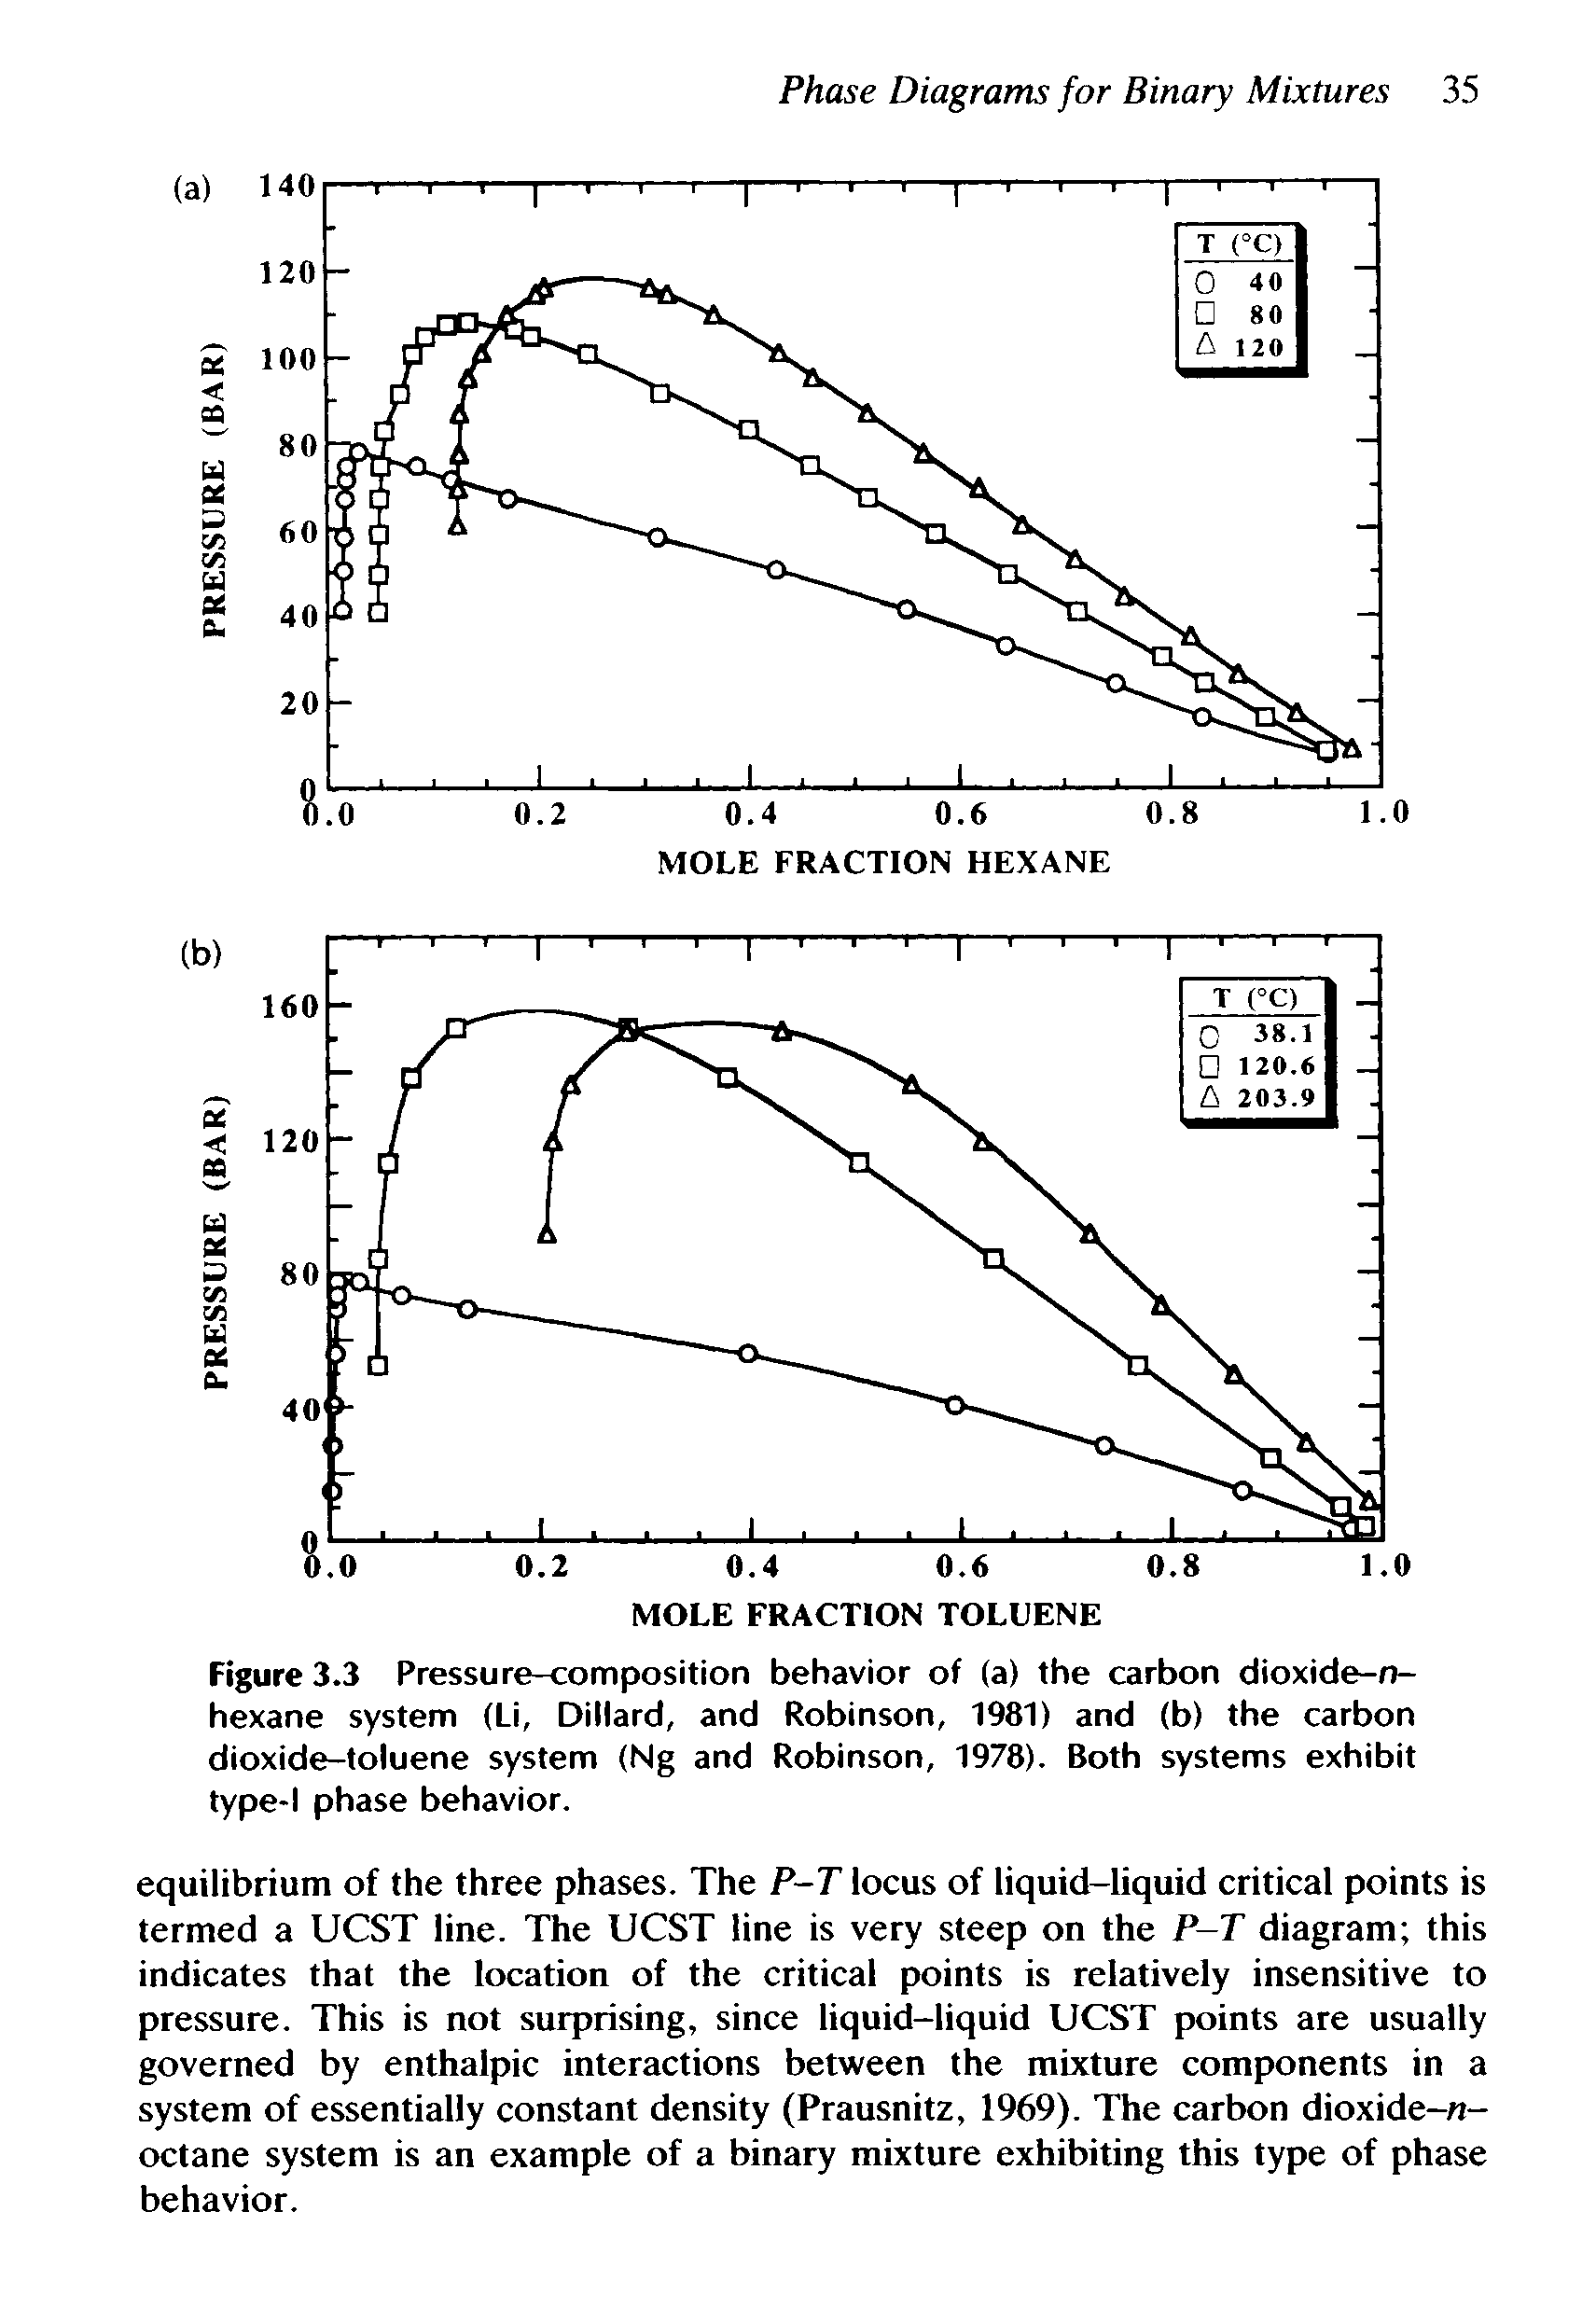 Figure 3.3 Pressure-composition behavior of (a) the carbon dioxide-n-hexane system (Li, Dillard, and Robinson, 1981) and (b) the carbon dioxide-toluene system (Ng and Robinson, 1978). Both systems exhibit type-1 phase behavior.